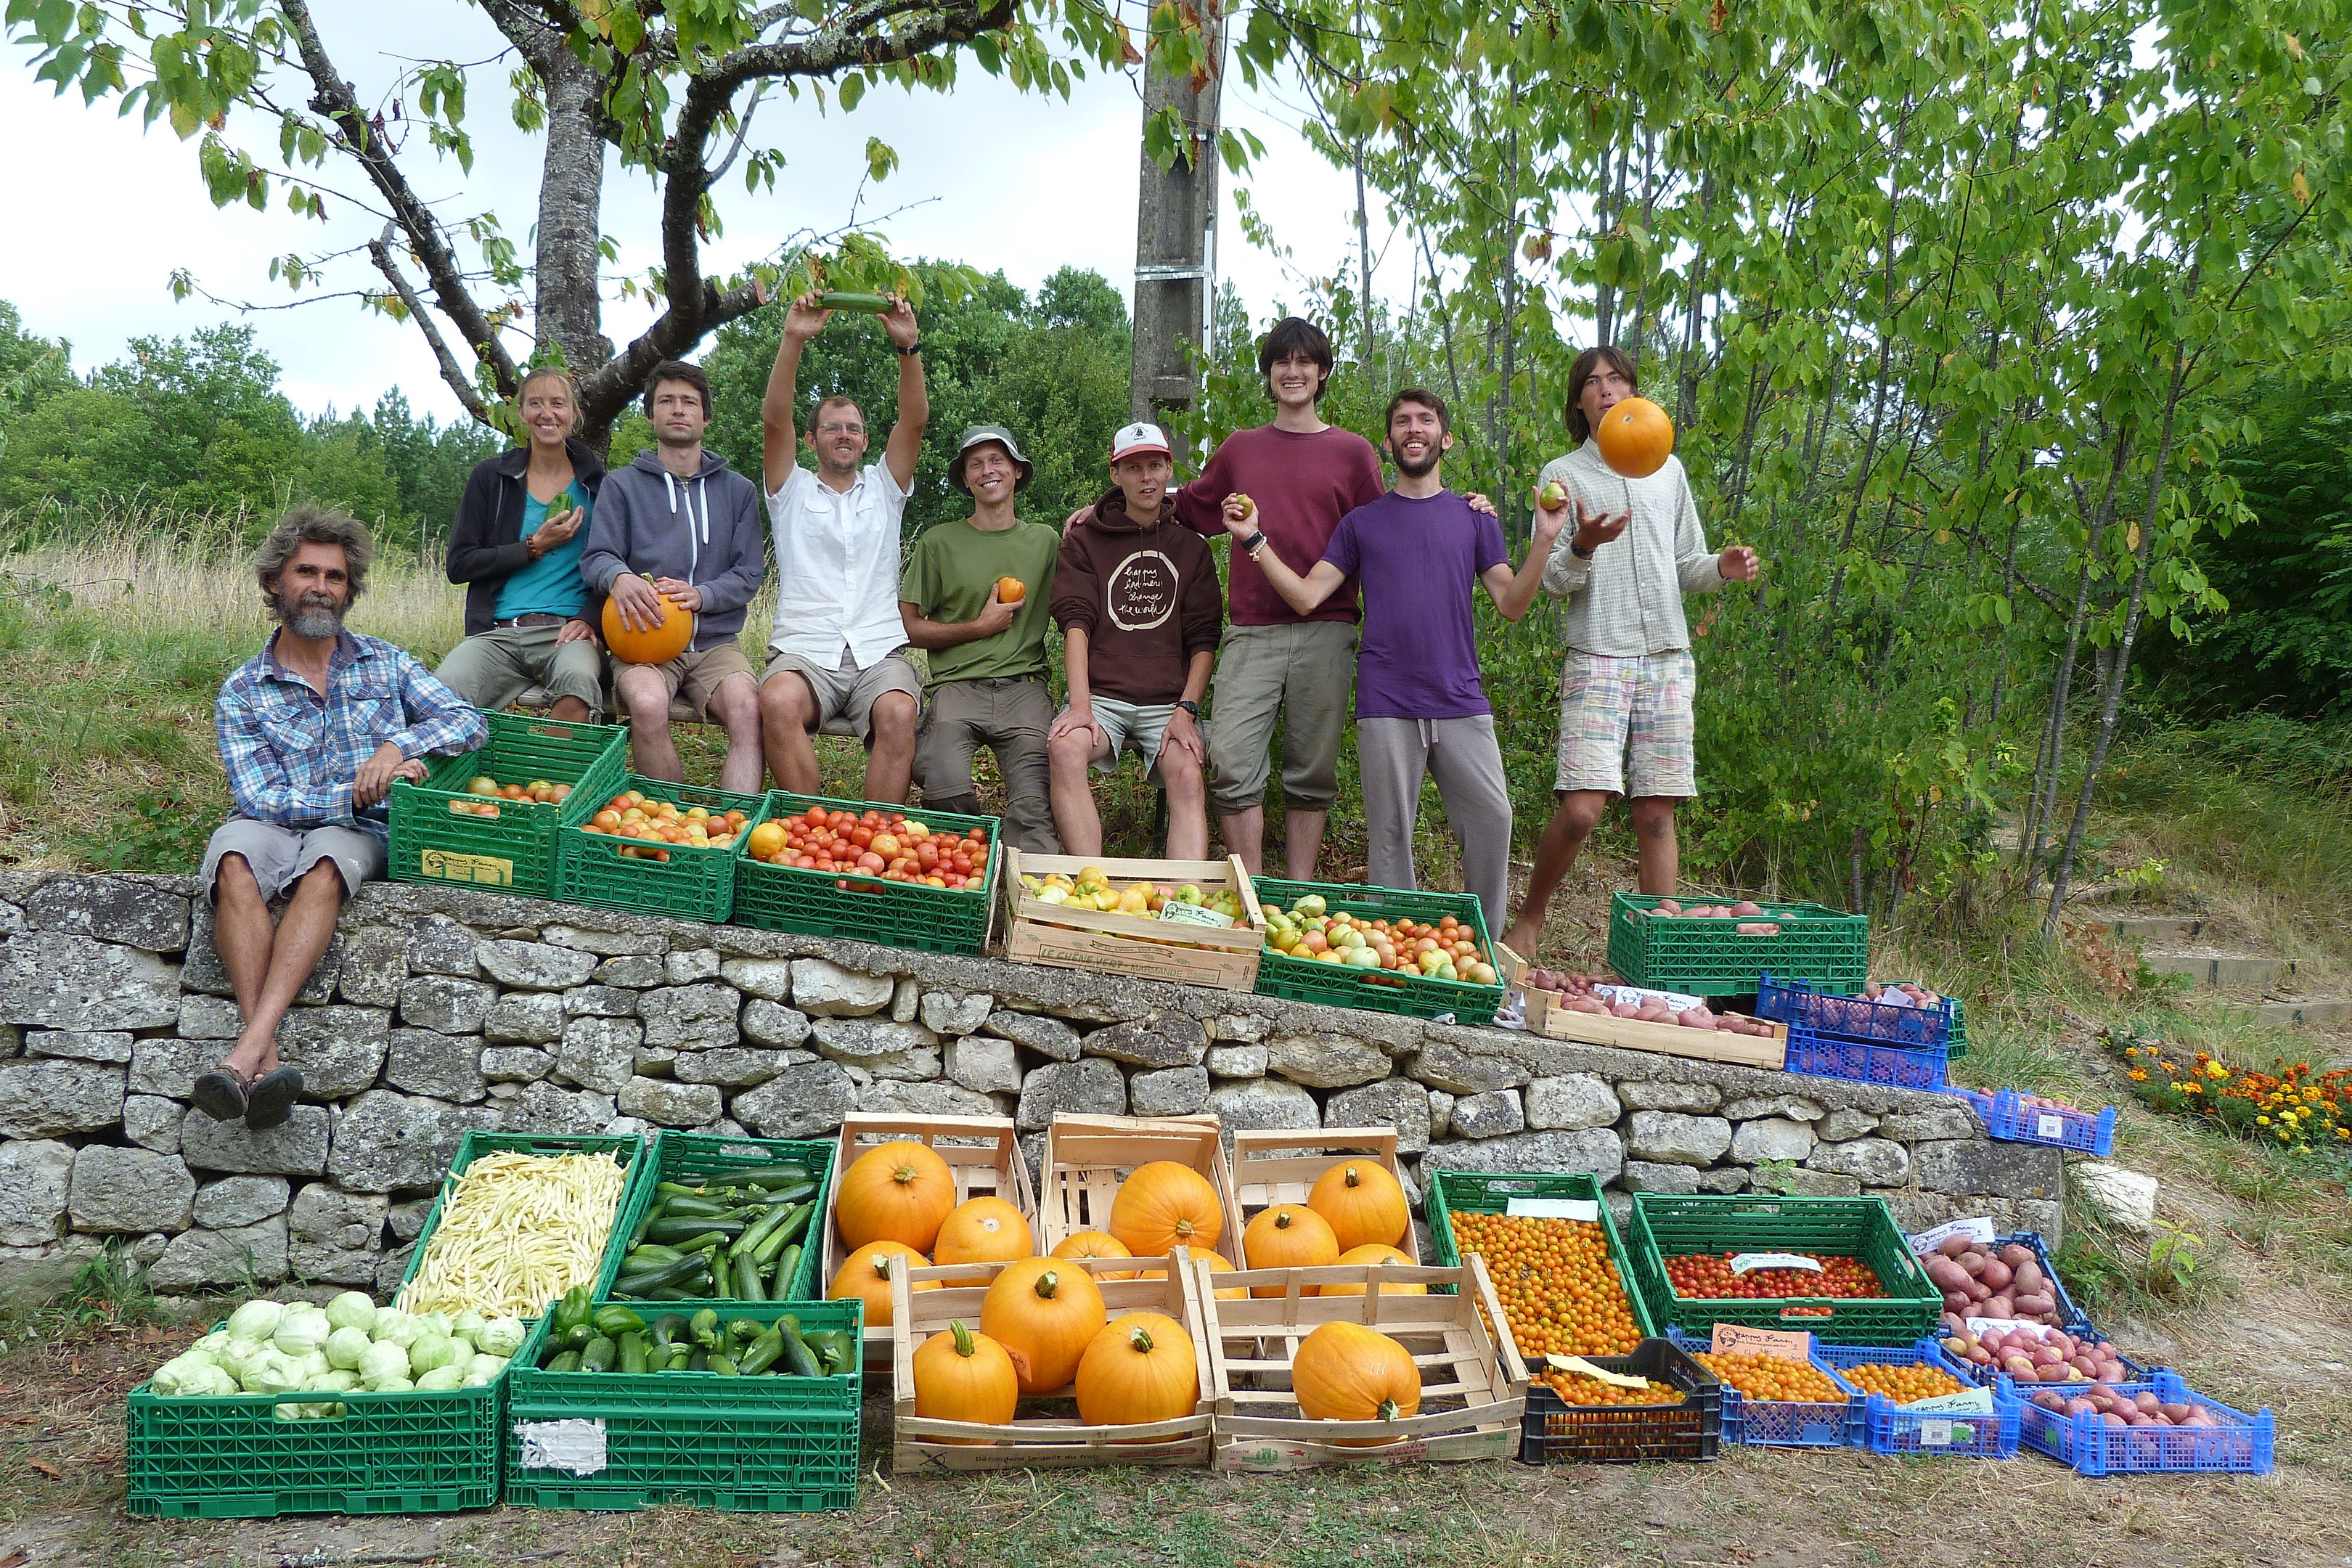 Some of the producers at Plum Village.